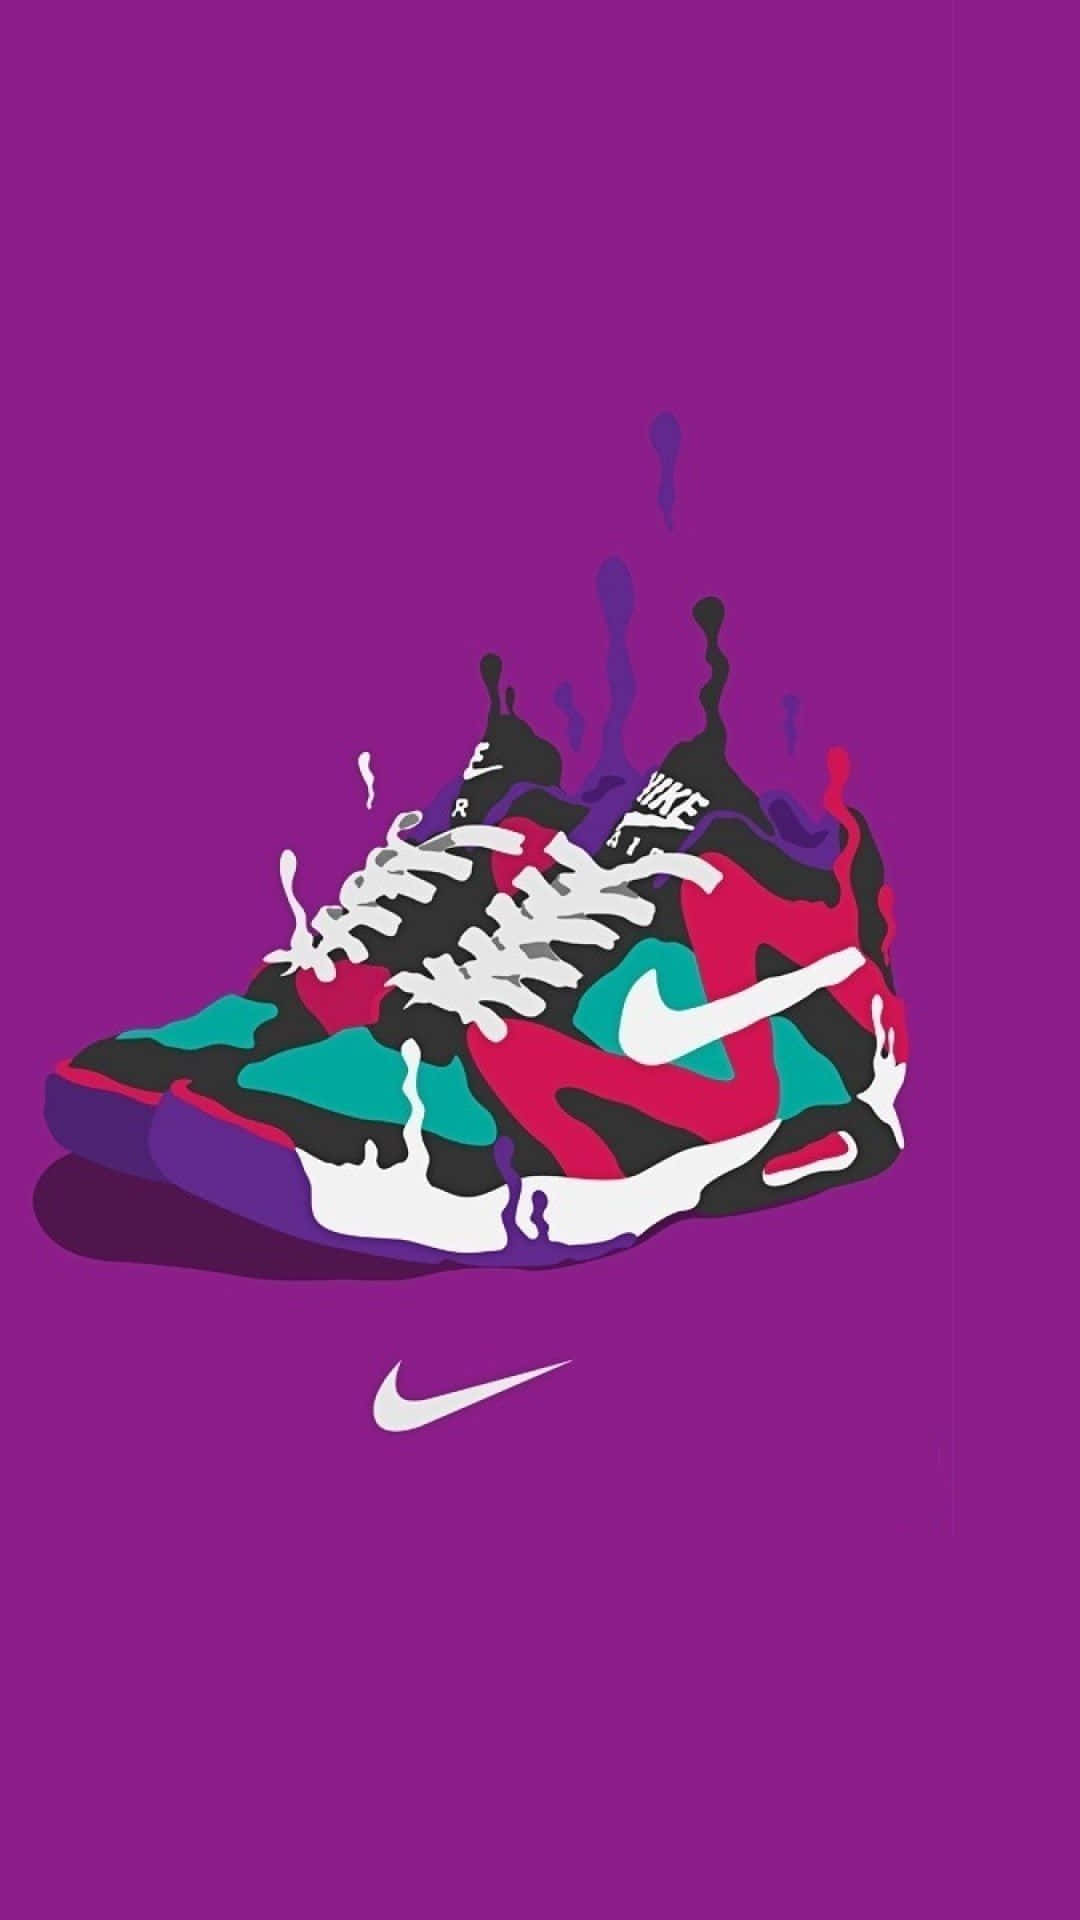 Free Sneakers Wallpaper Downloads, [100+] Wallpapers for FREE | Wallpapers.com